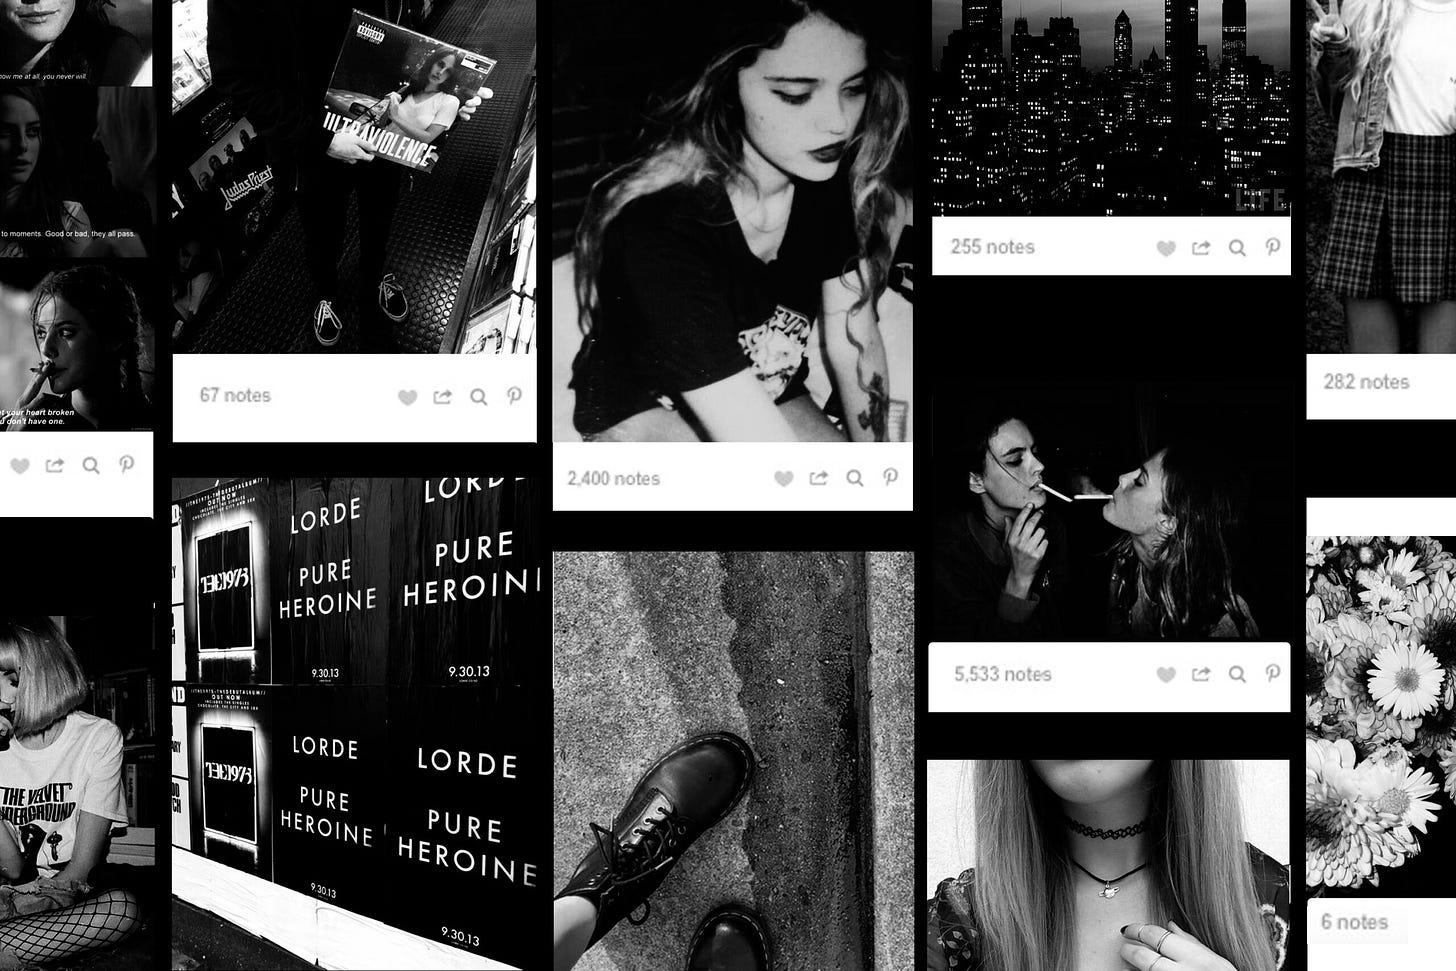 Nostalgia in trends: The 2014 Tumblr aesthetic has returned | The Stony  Brook Press